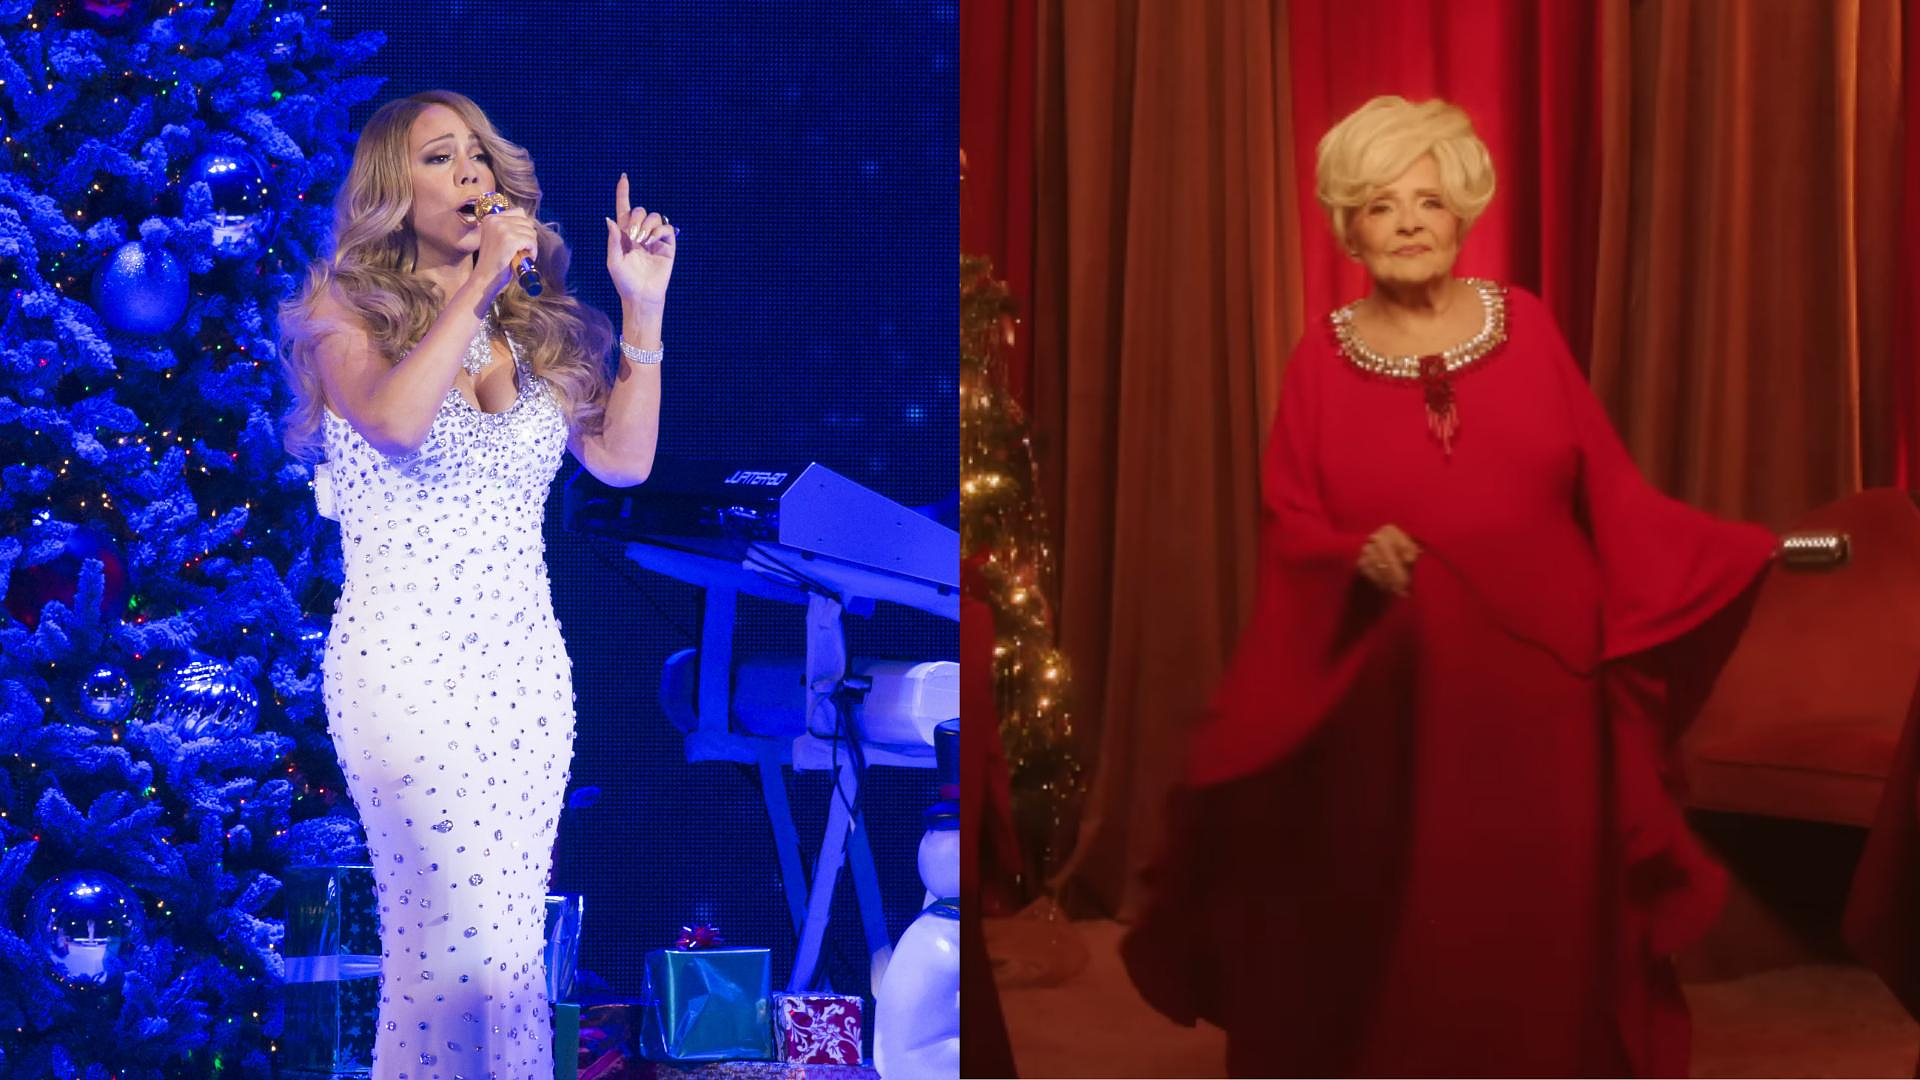 At 78, Brenda Lee steals the spotlight from Mariah Carey with a 1950s Christmas song